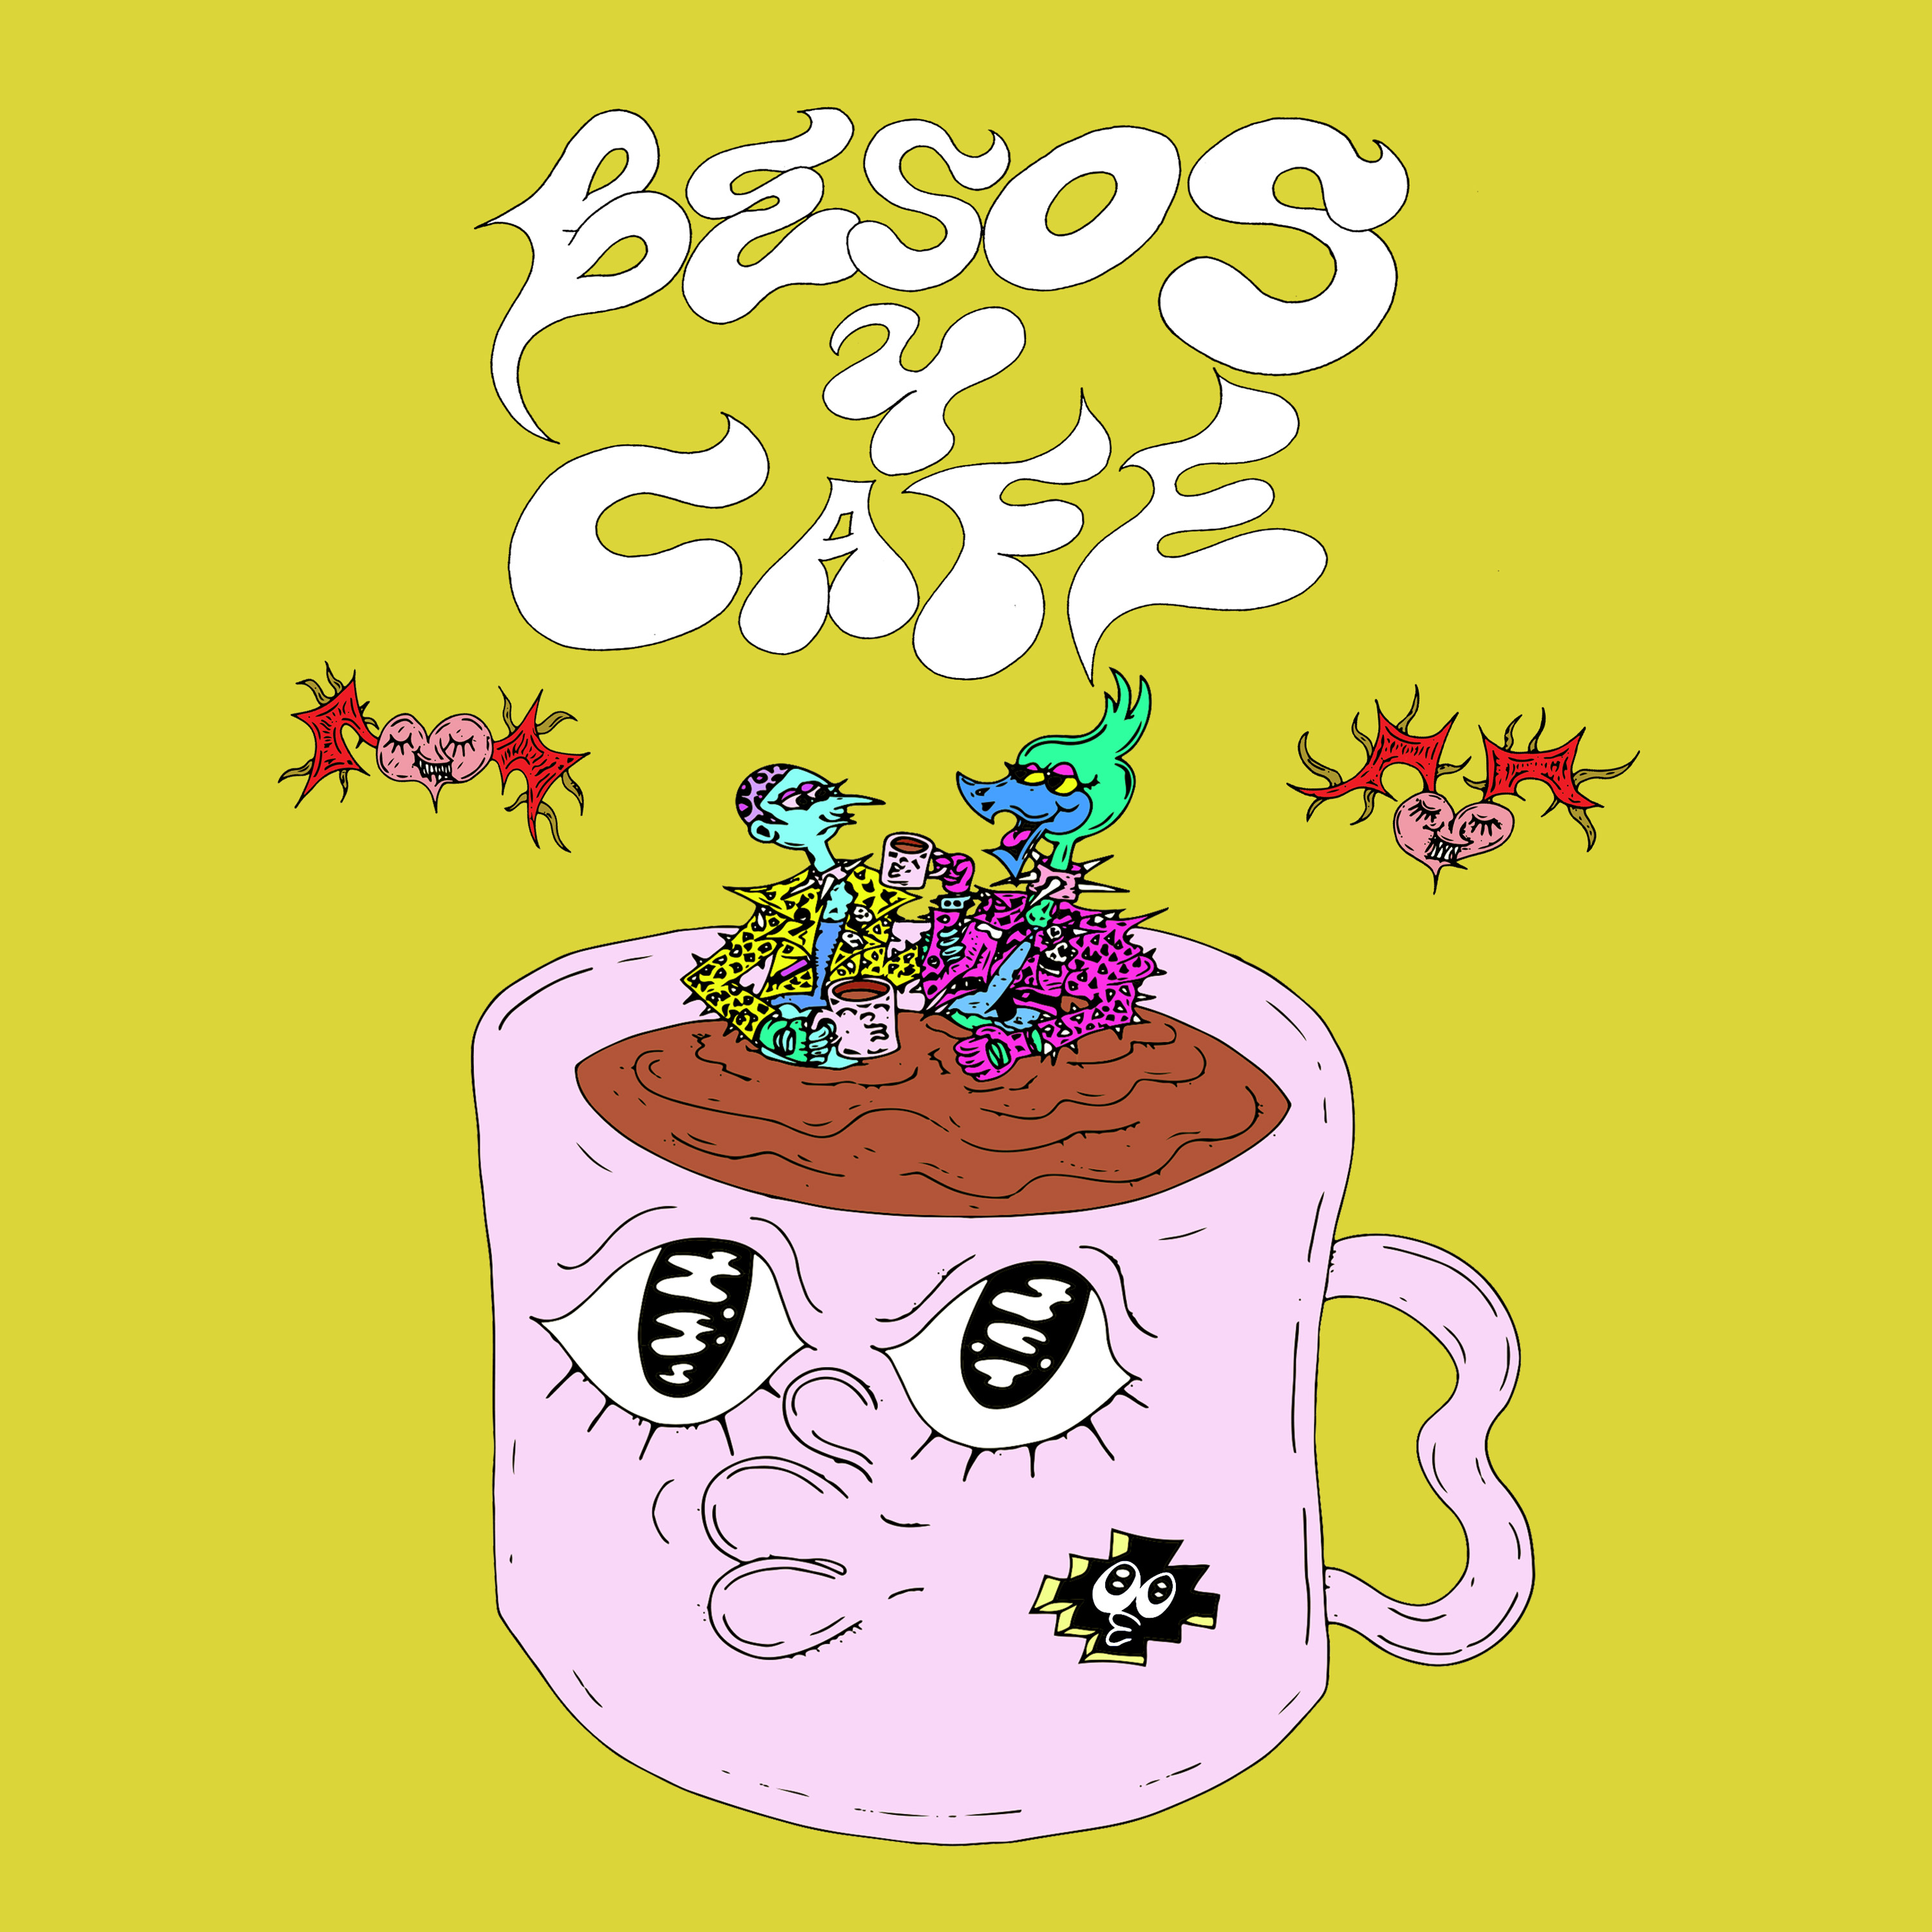 Besos y Café is Out Now!